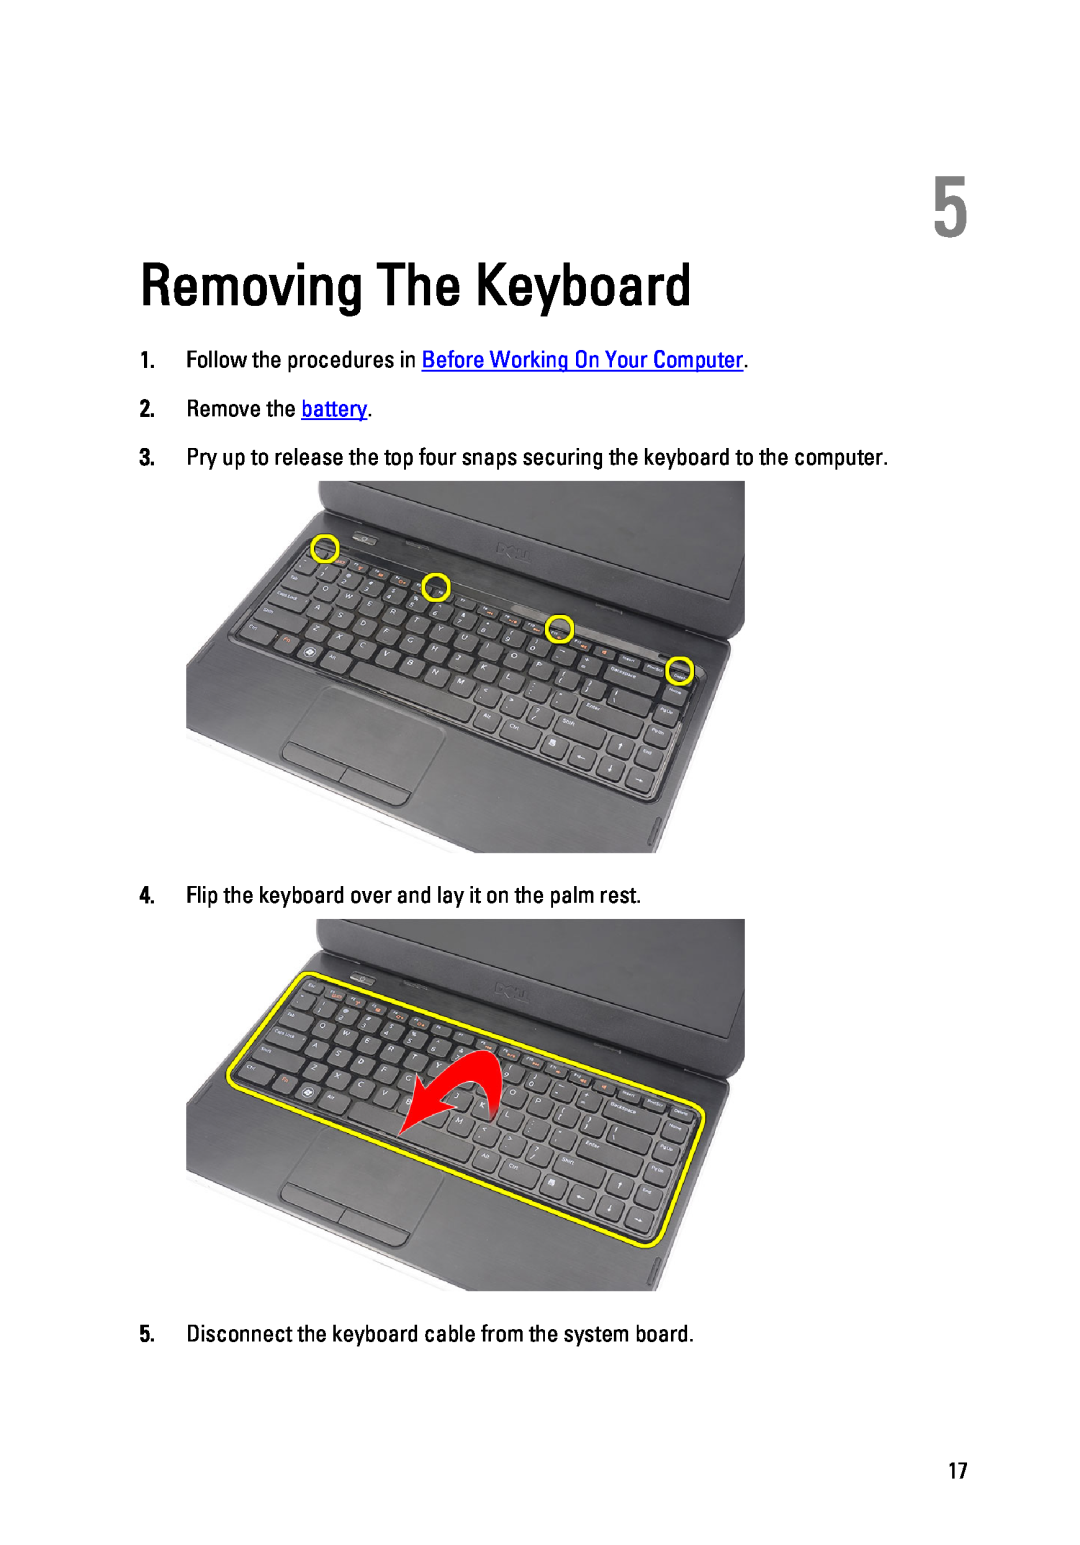 Dell P22G owner manual Removing The Keyboard, Flip the keyboard over and lay it on the palm rest, Remove the battery 